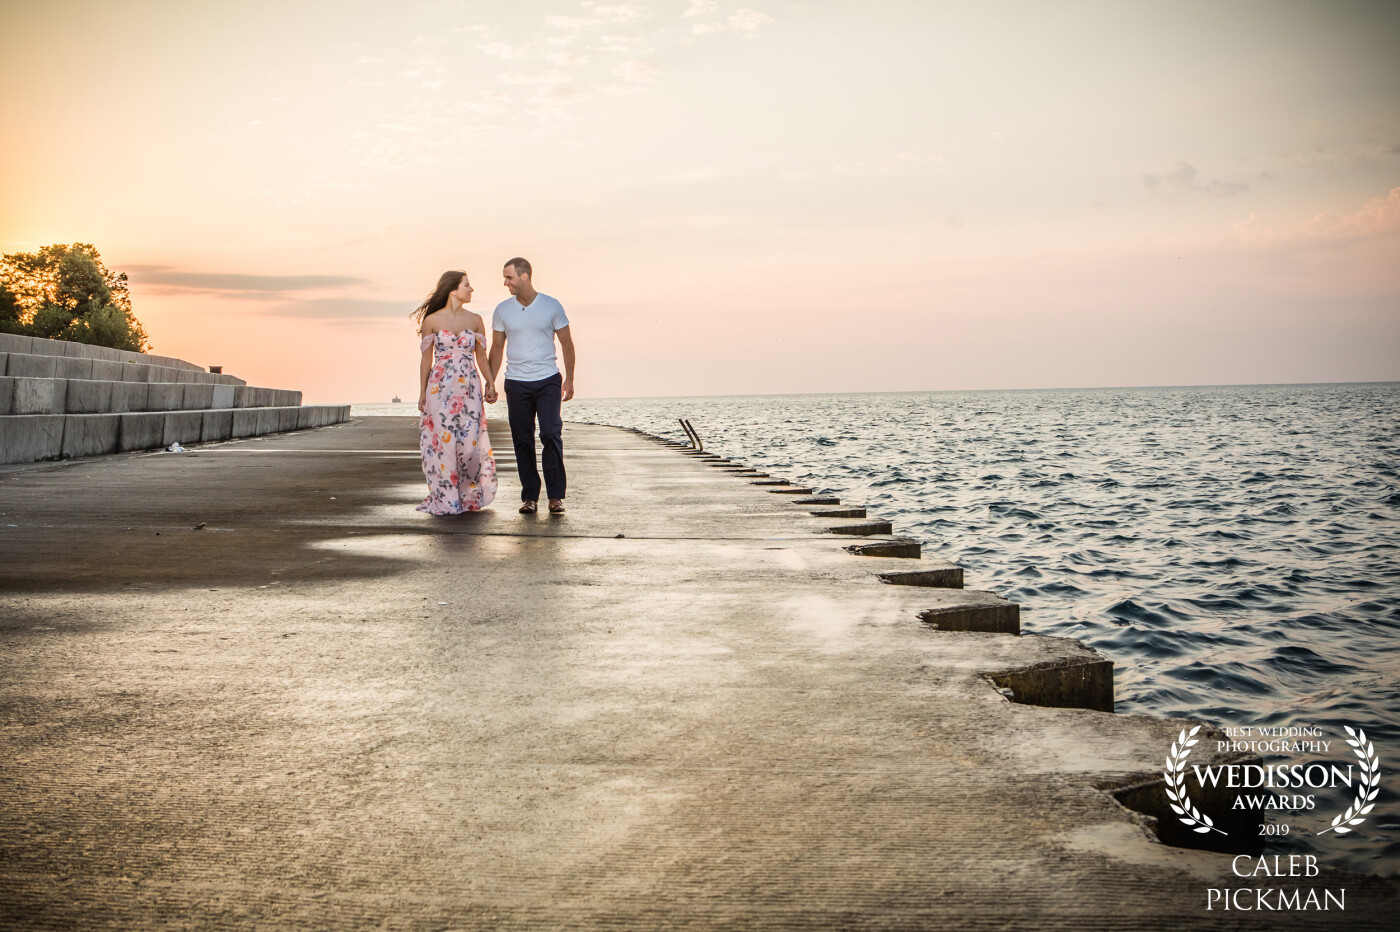  From sunrise to sunset, from day to night, we will forever walk hand-in-hand. <br />
This was a 5:00 am engagement shoot with an amazing couple!